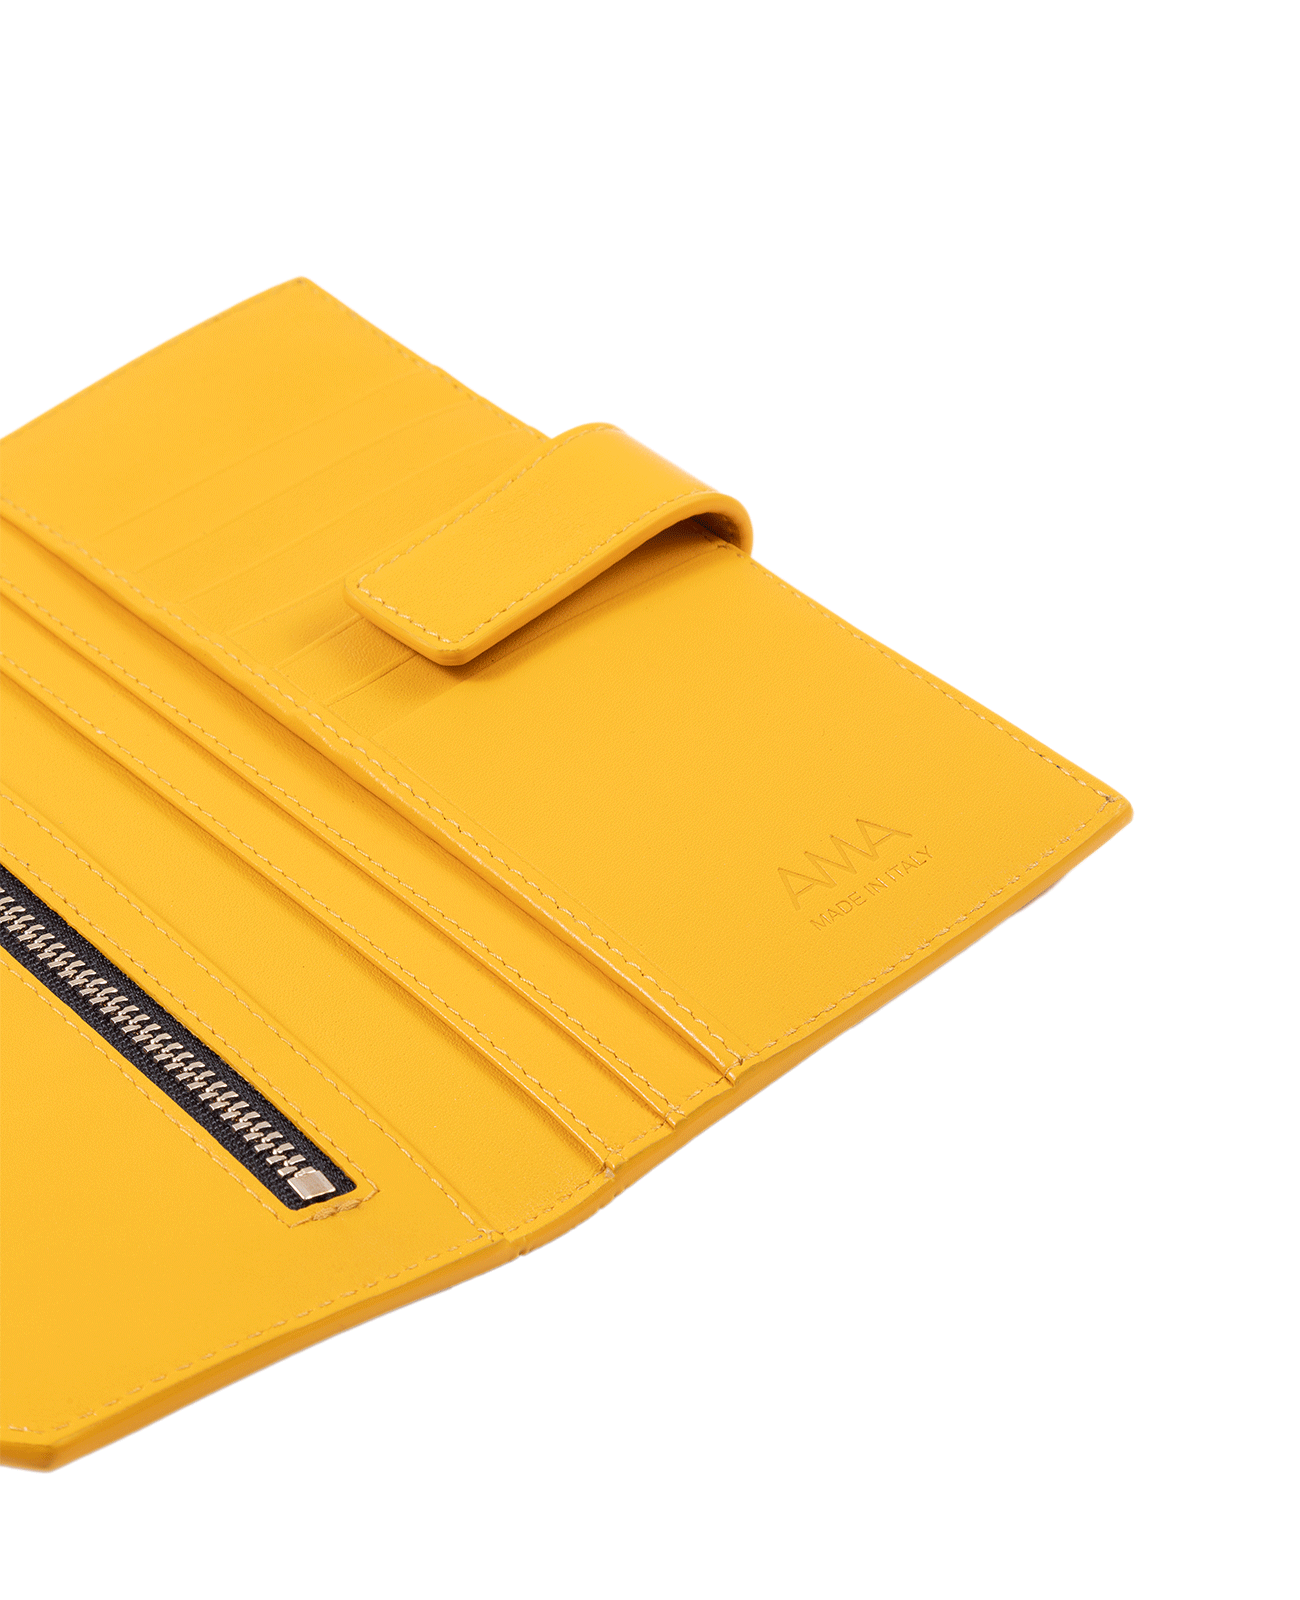 Wallet in Italian full-grain leather. Designed to carry your personal items. Available in a variety of styles and designs. Color: Saffron. Size: Medium